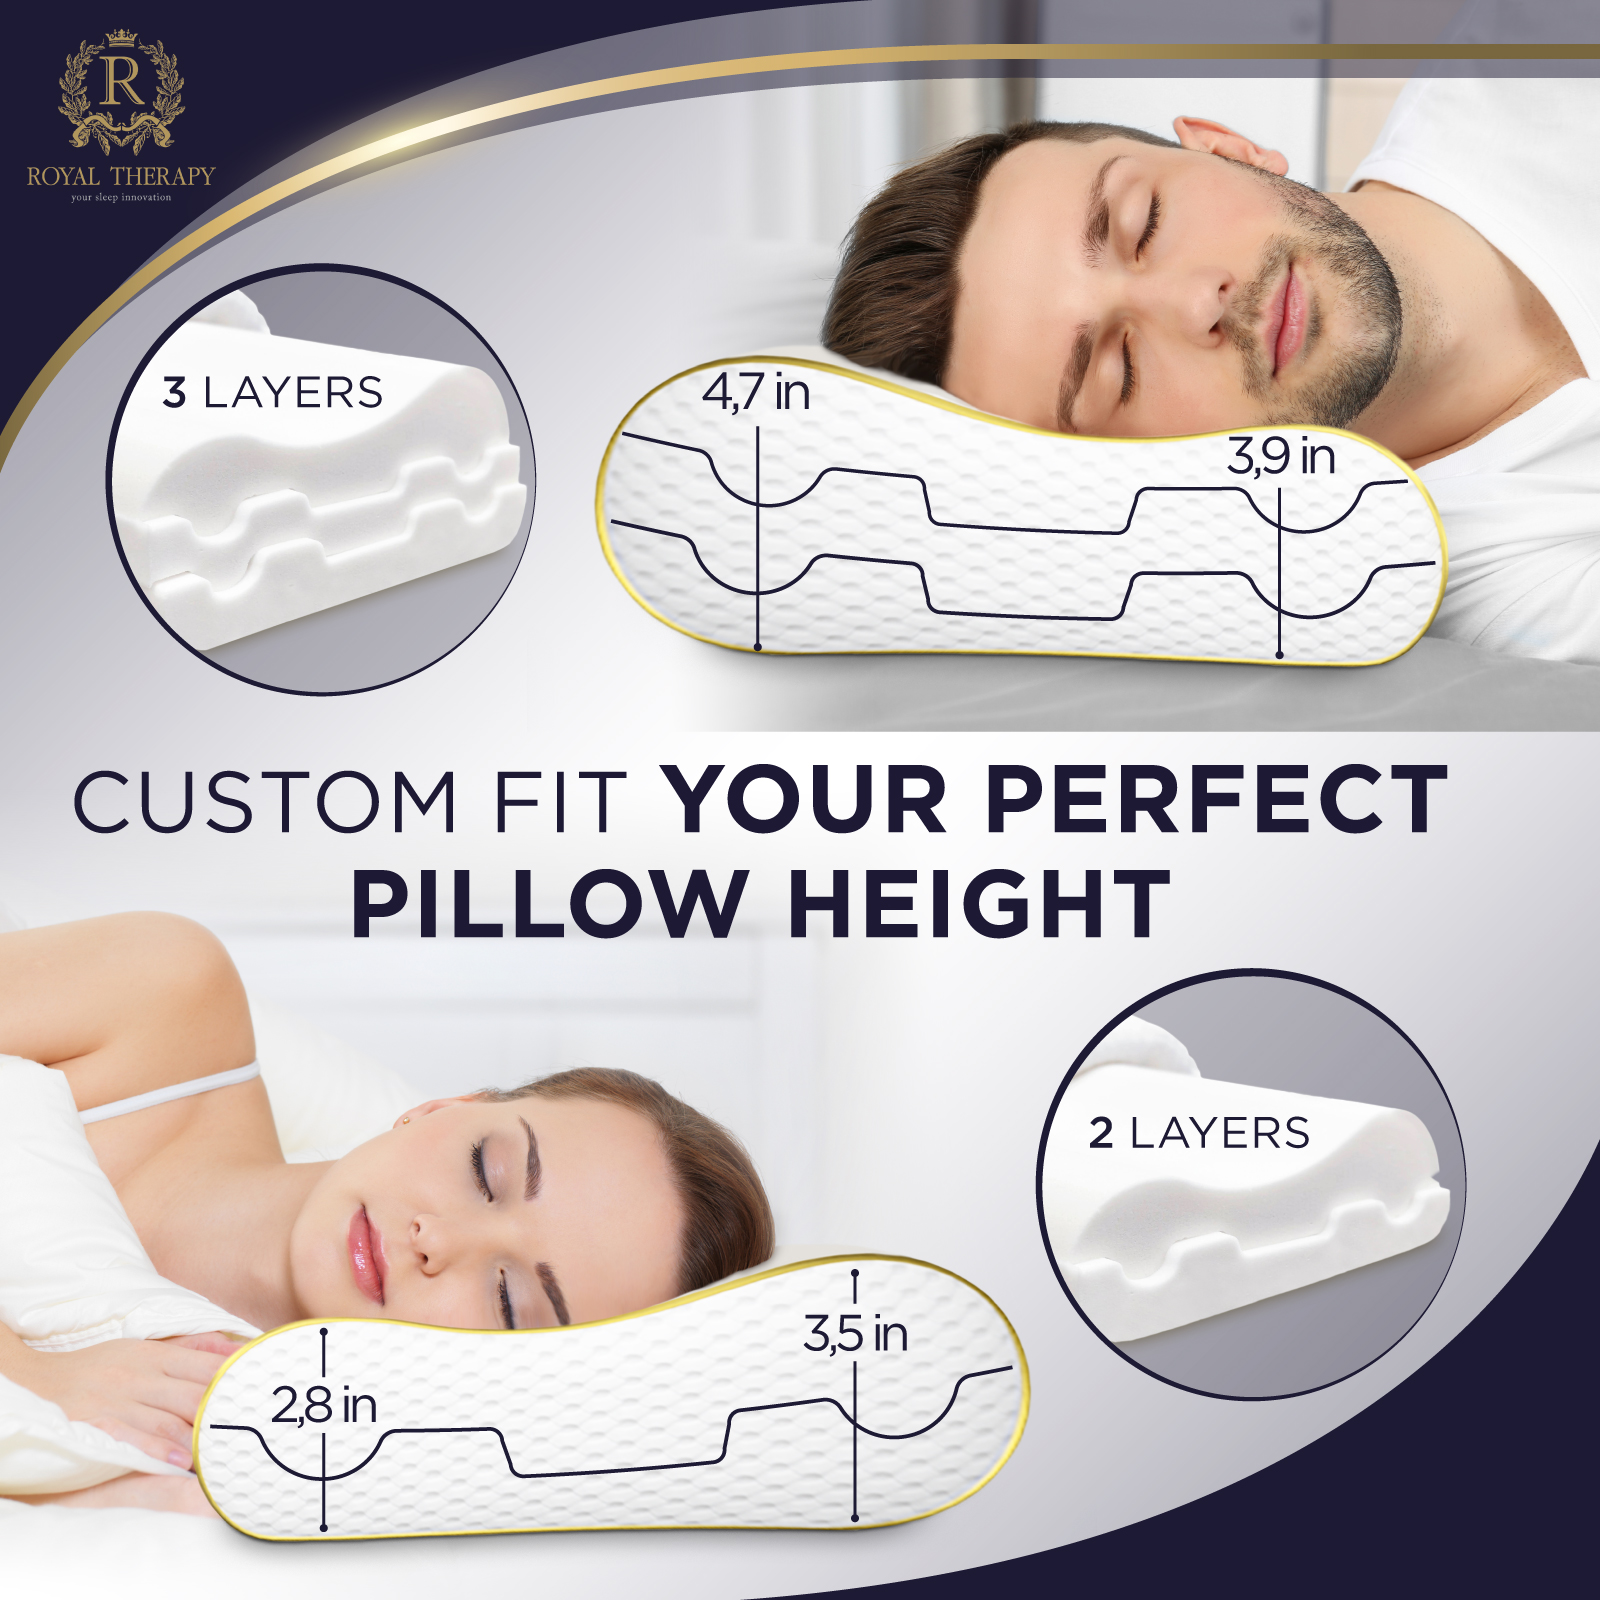 Royal Therapy Queen Memory Foam Contour Pillow, White Bed Pillow for Adult Neck & Shoulder, 3 lb - image 3 of 6